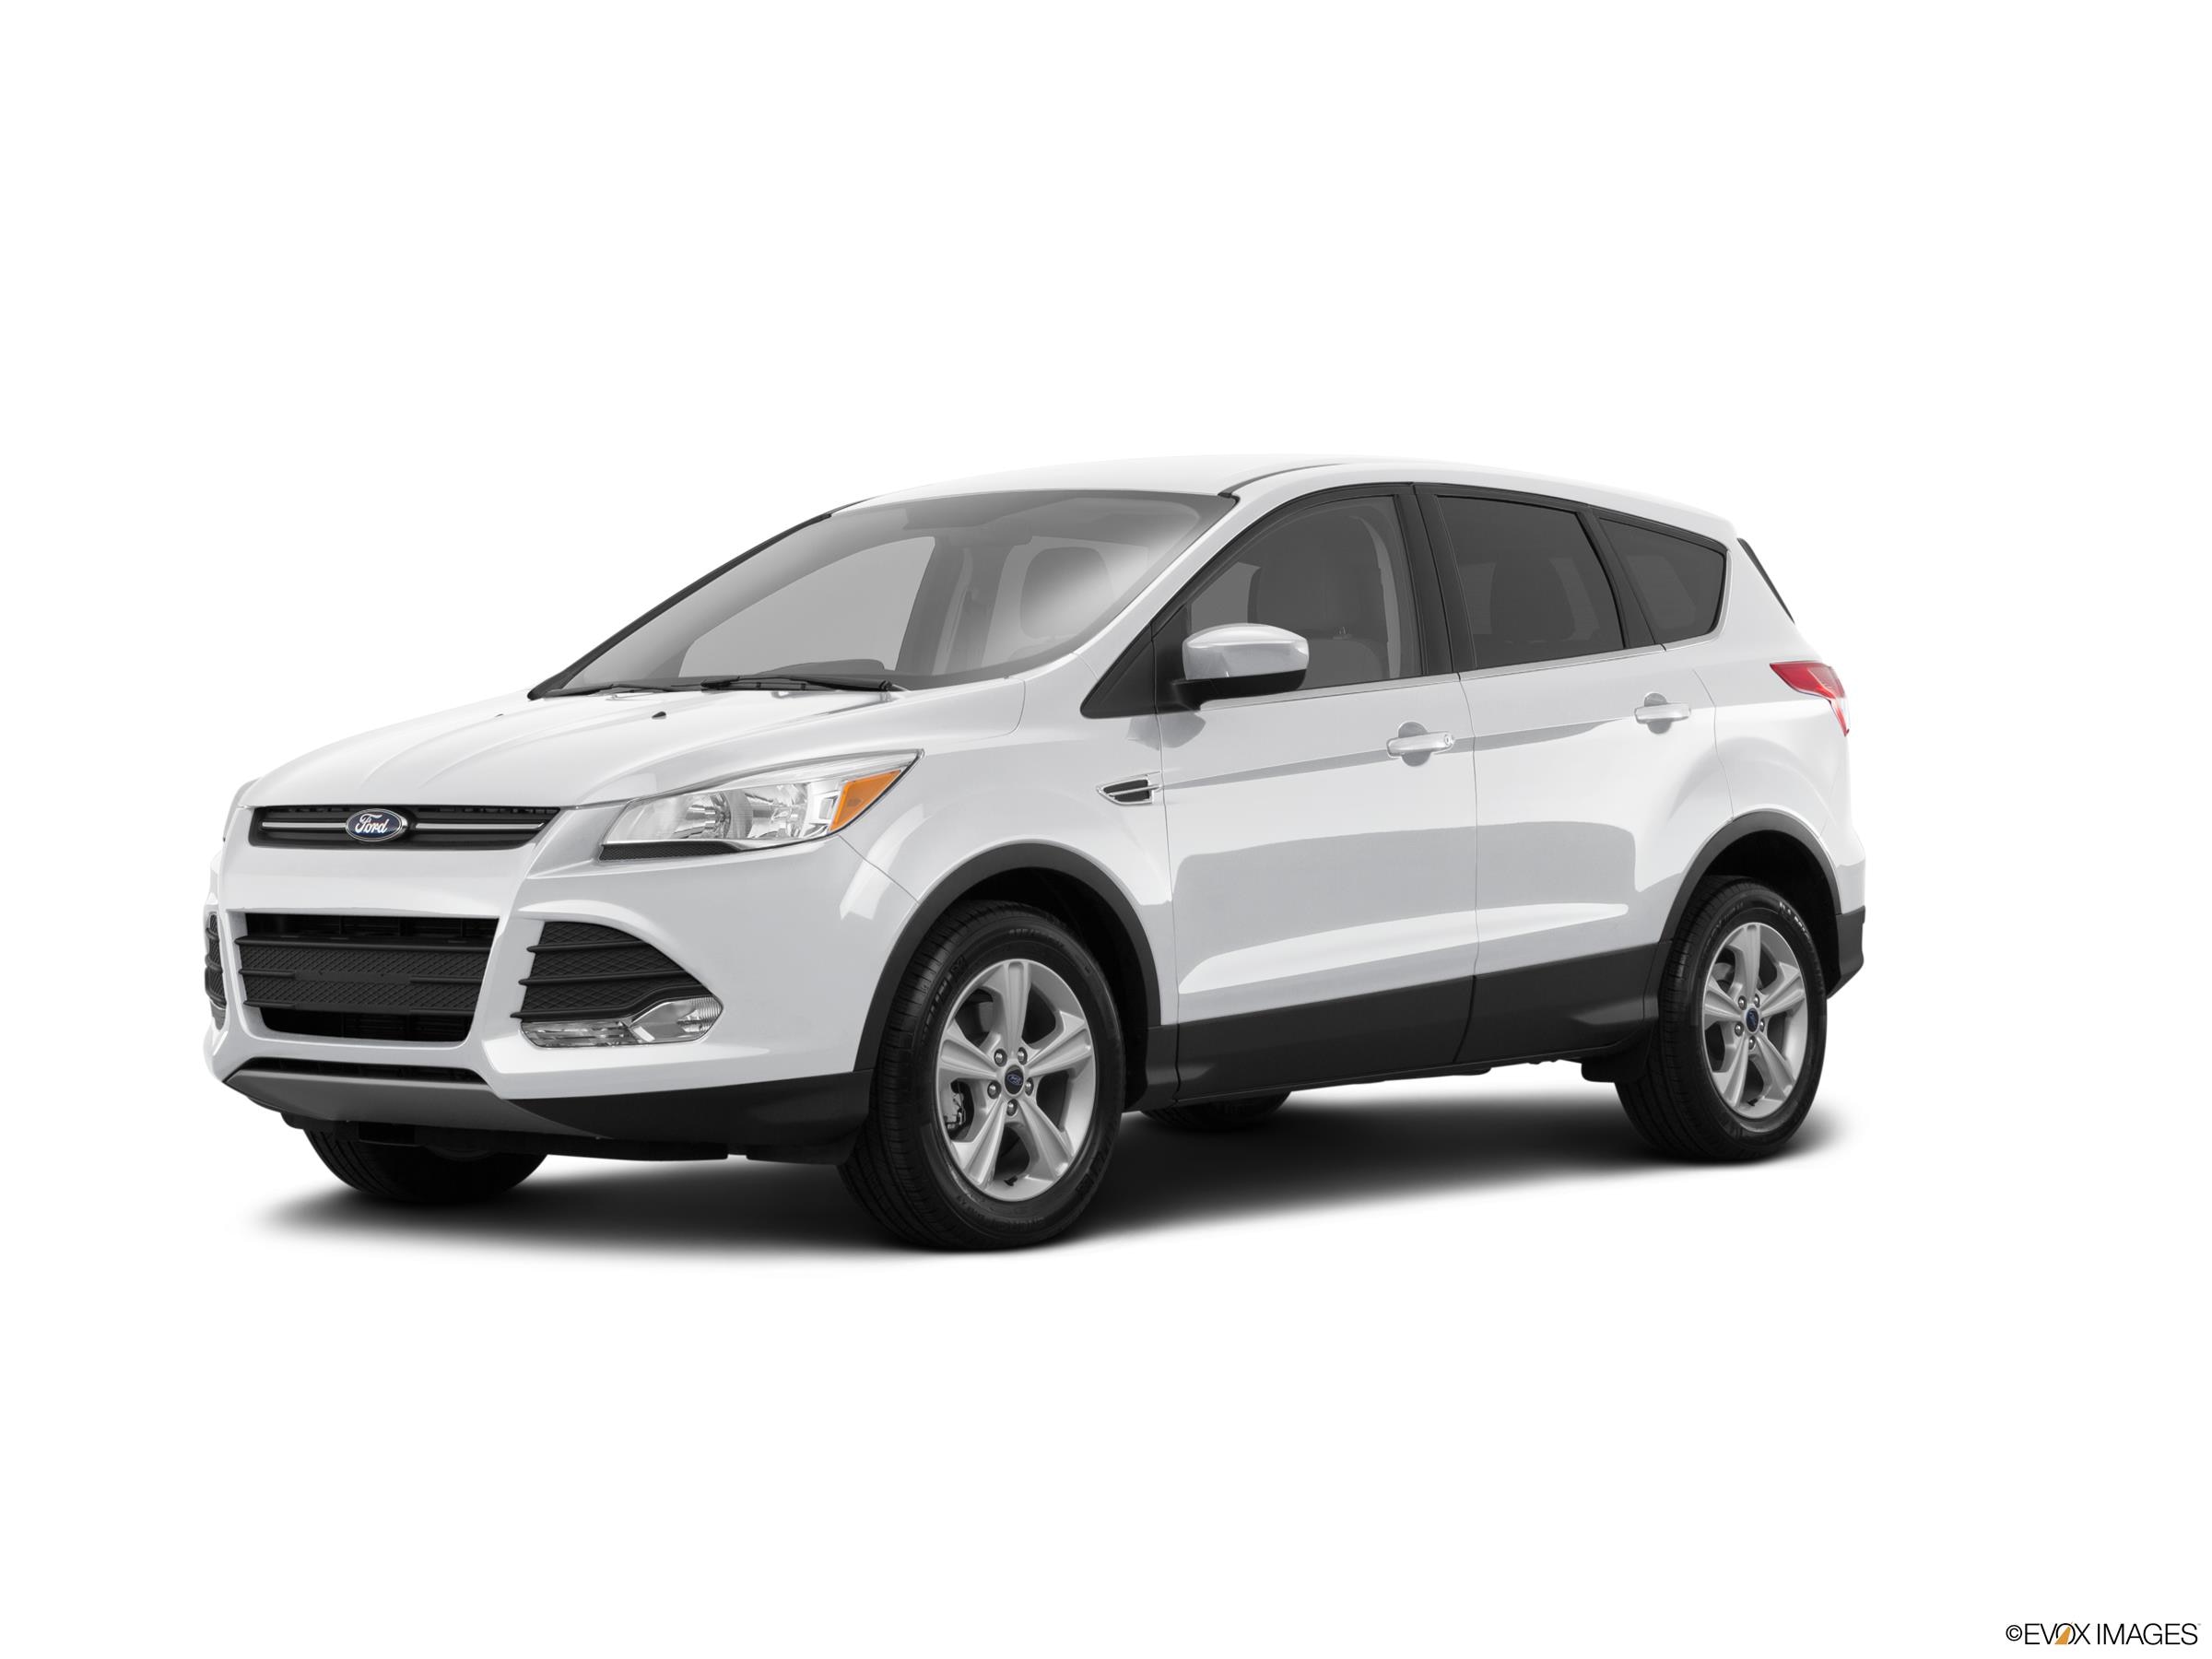 2016 Ford Escape Research, photos, specs, and expertise | CarMax